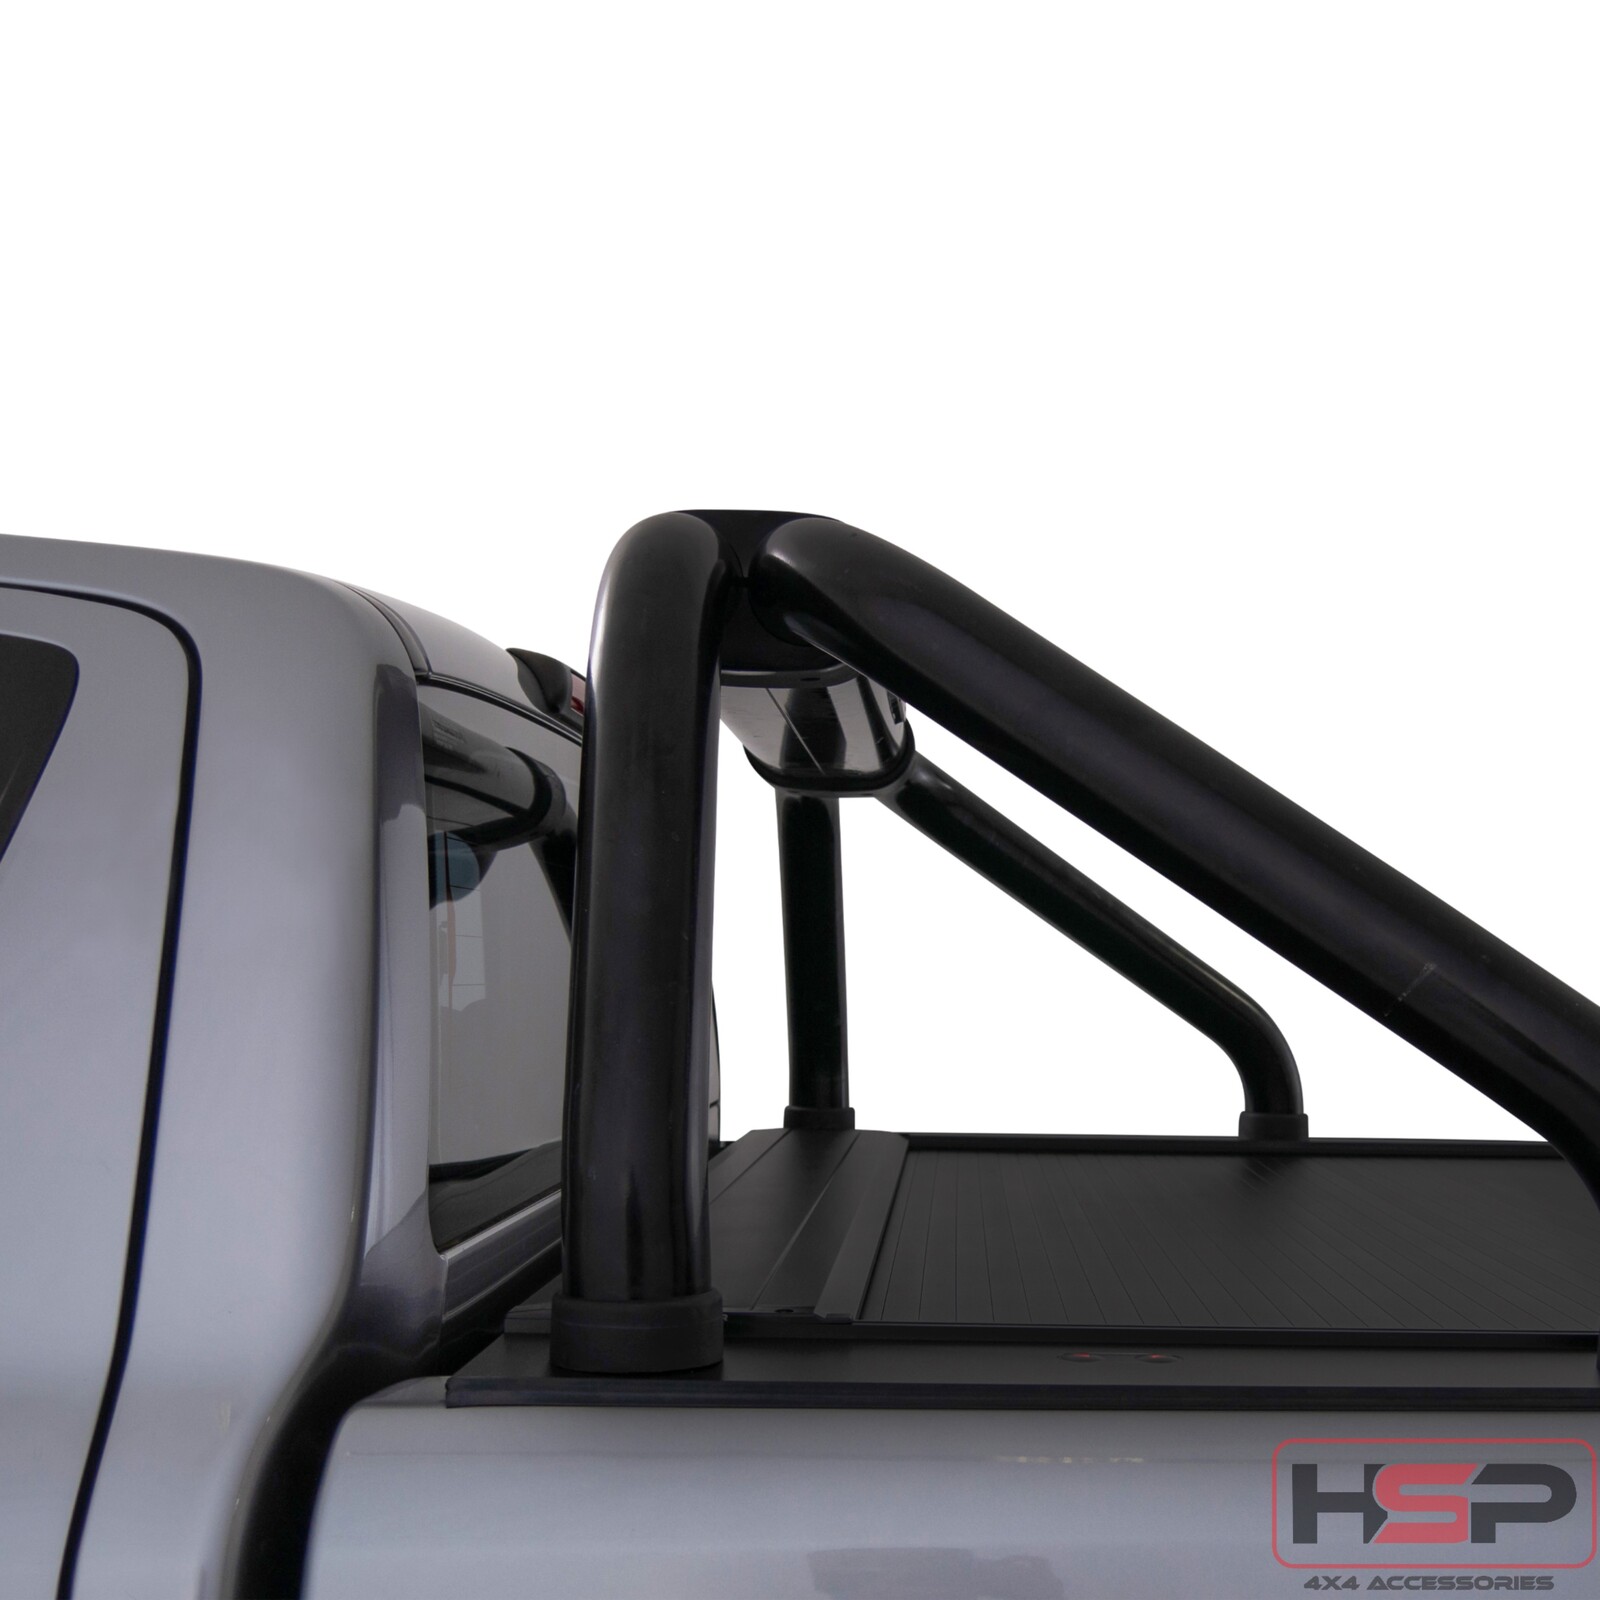 HSP Roll R Cover Series 3 To Suit Mazda BT-50 2011-2020 Dual Cab With Genuine A Frame Sports Bar 